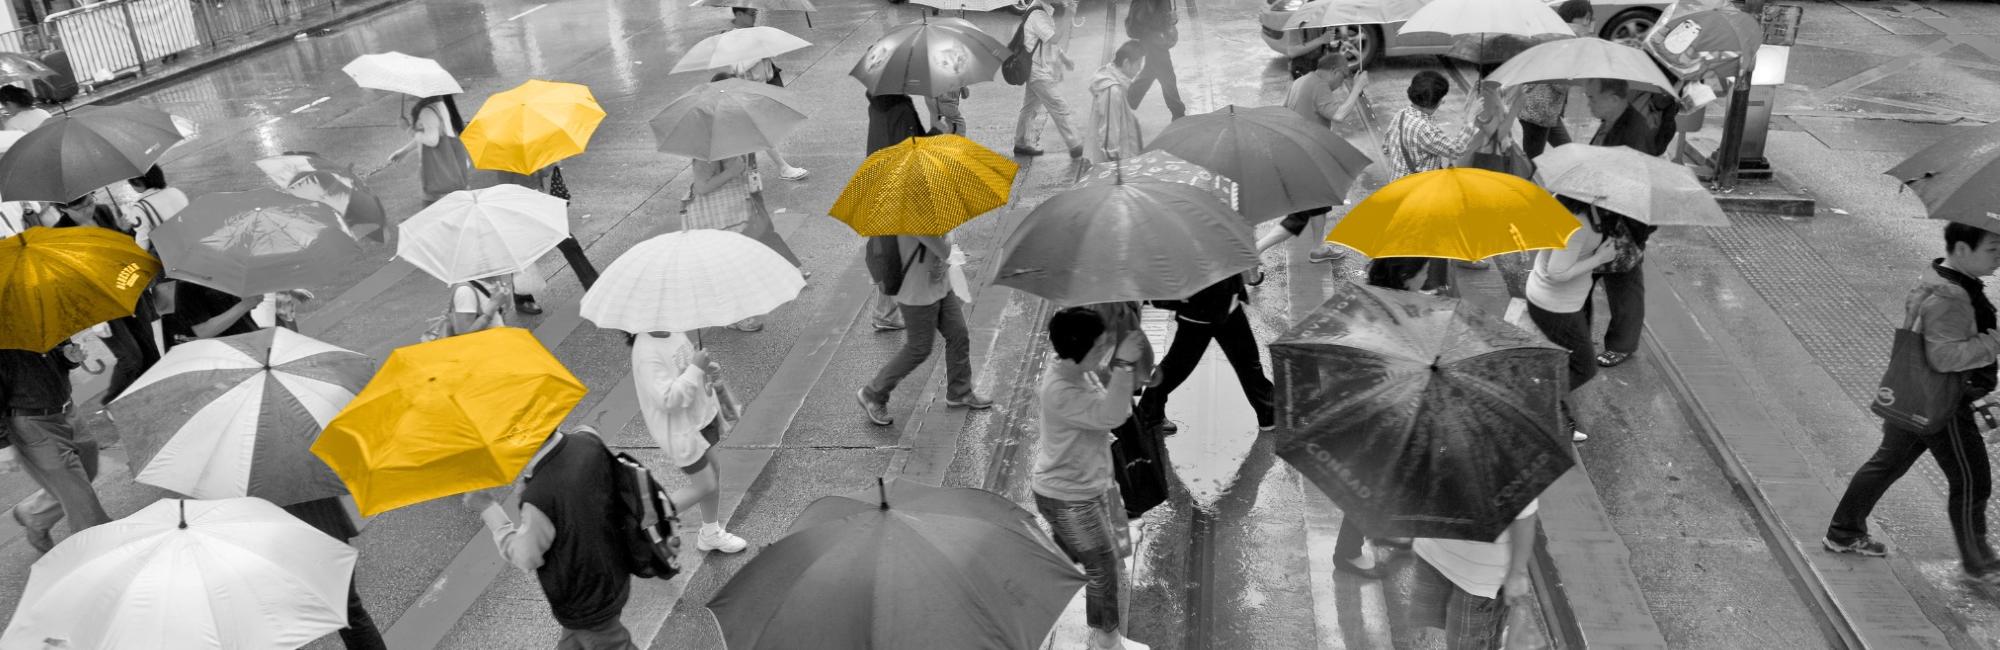 A crowd of people with umbrellas walks across the street on a rainy day. While image is black and white, some umbrellas are bright yellow. 